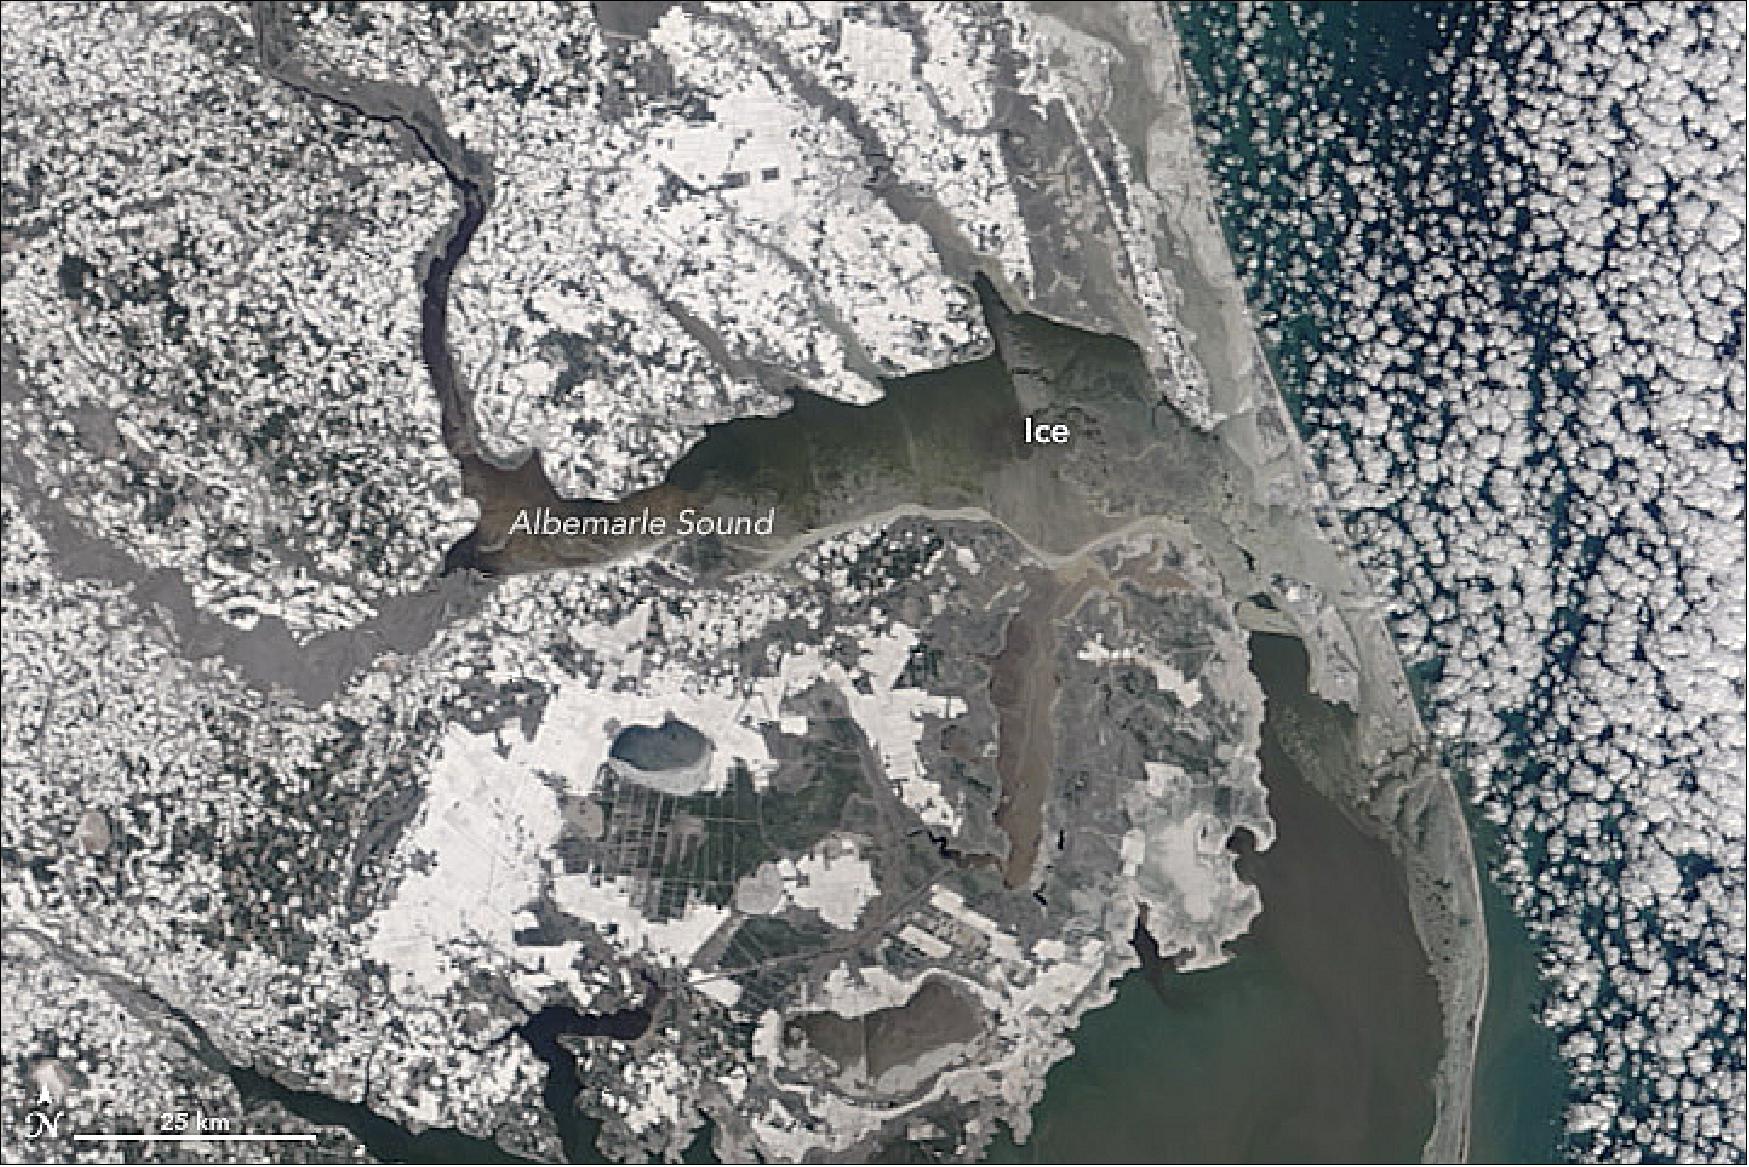 Figure 44: MODIS image of the Albemarle Sound in North Carolina acquired on 7 Jan. 2018 (image credit: NASA image by Jeff Schmaltz, LANCE/EOSDIS Rapid Response. Image cropping and caption by Adam Voiland)